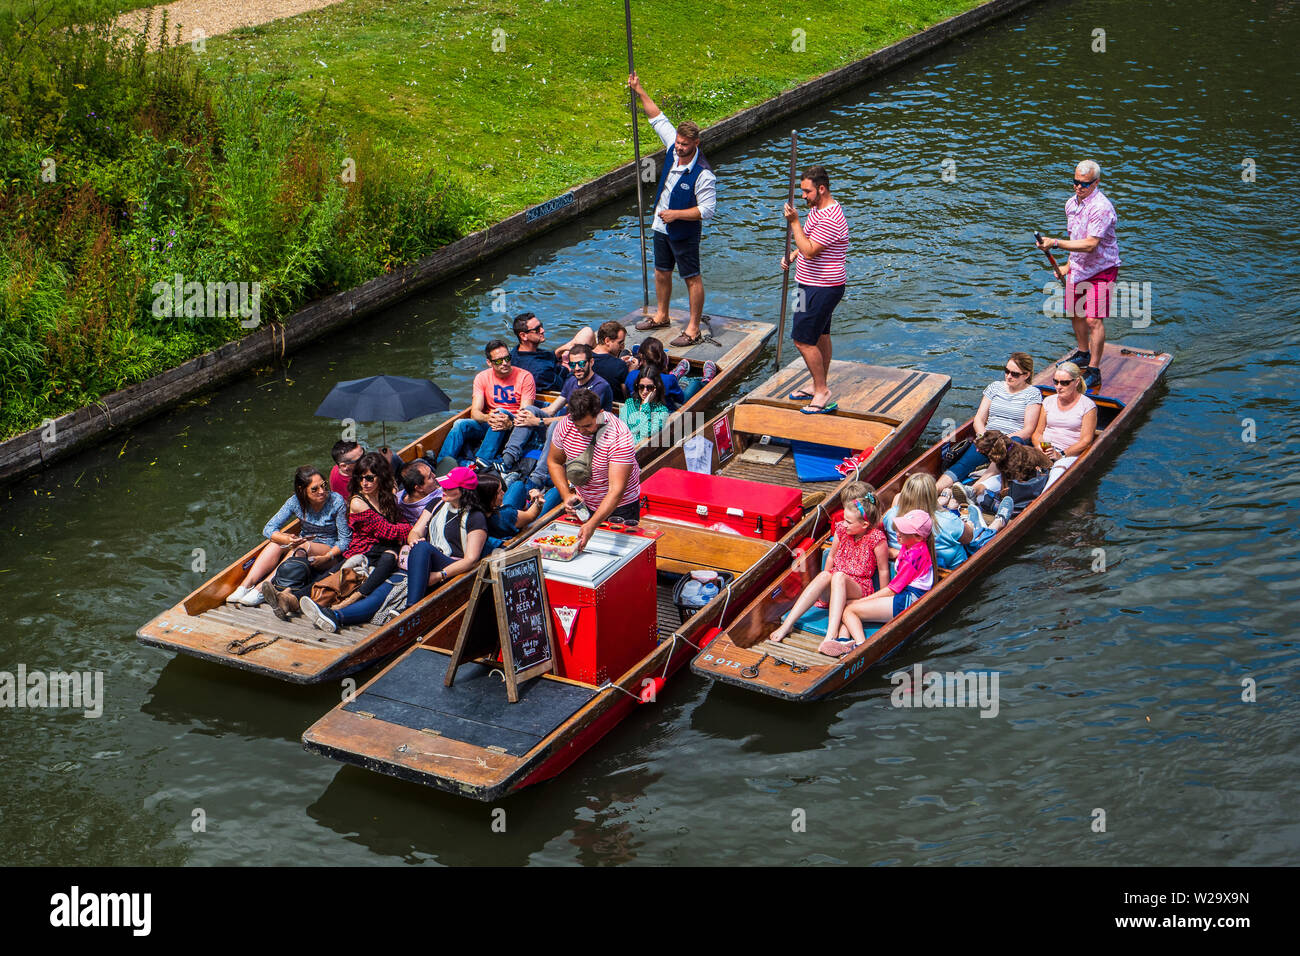 Drinks Punt Cambridge - selling Pims to Punters on the River Cam in Central Cambridge - Cambridge Tourism Stock Photo